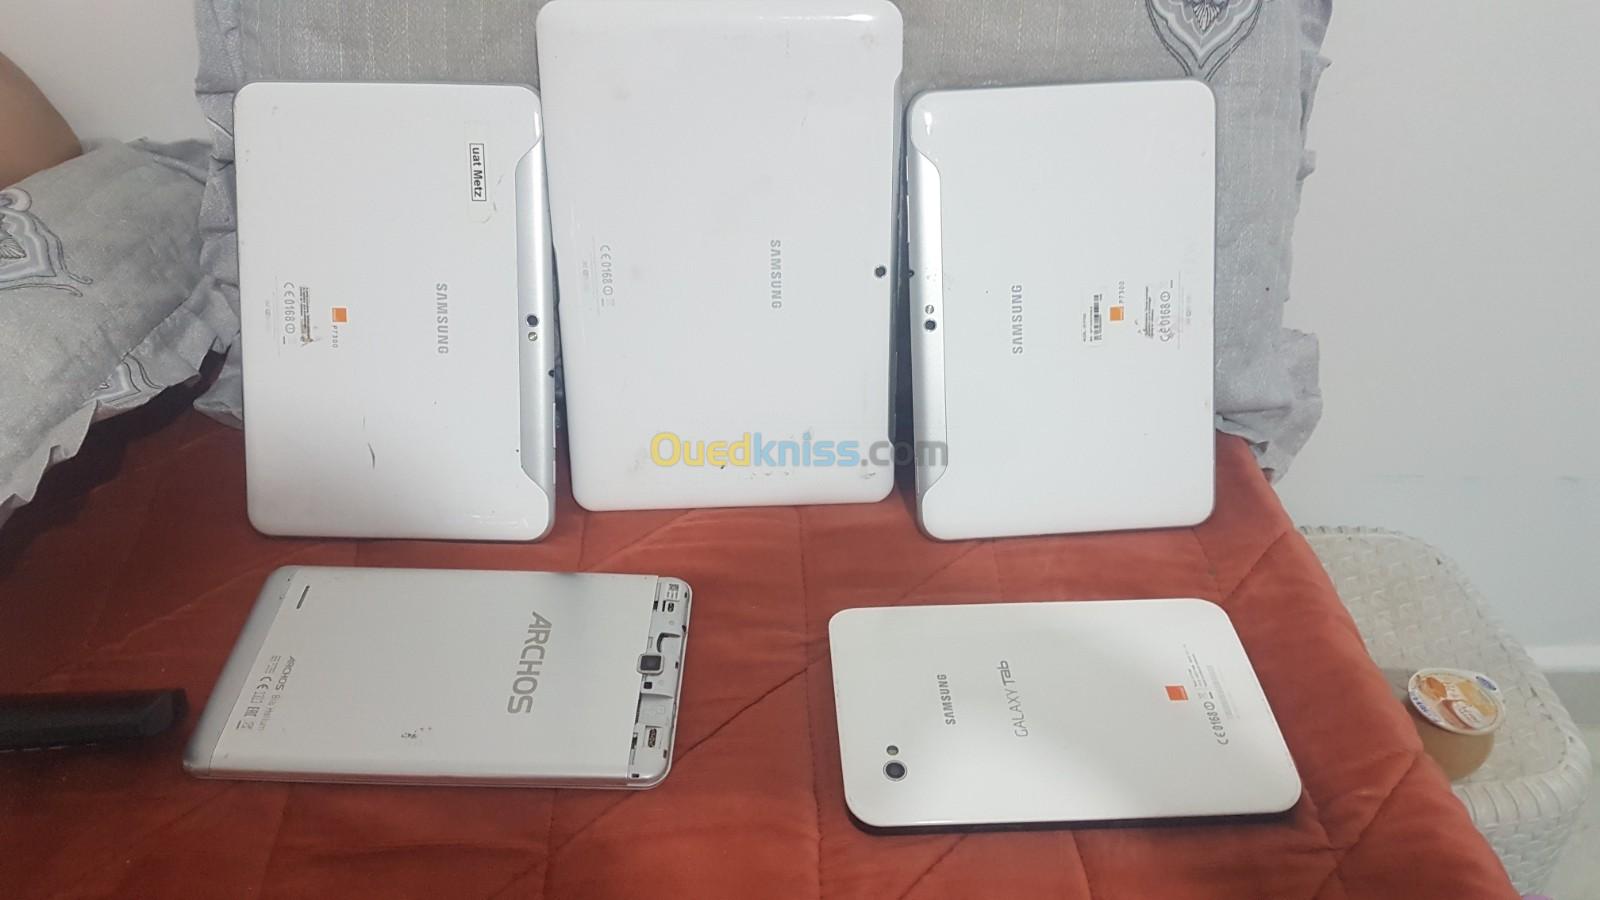 Lot de tablettes lenovo sumsung sony xperia..... Tablettes tactiles Android avec puce